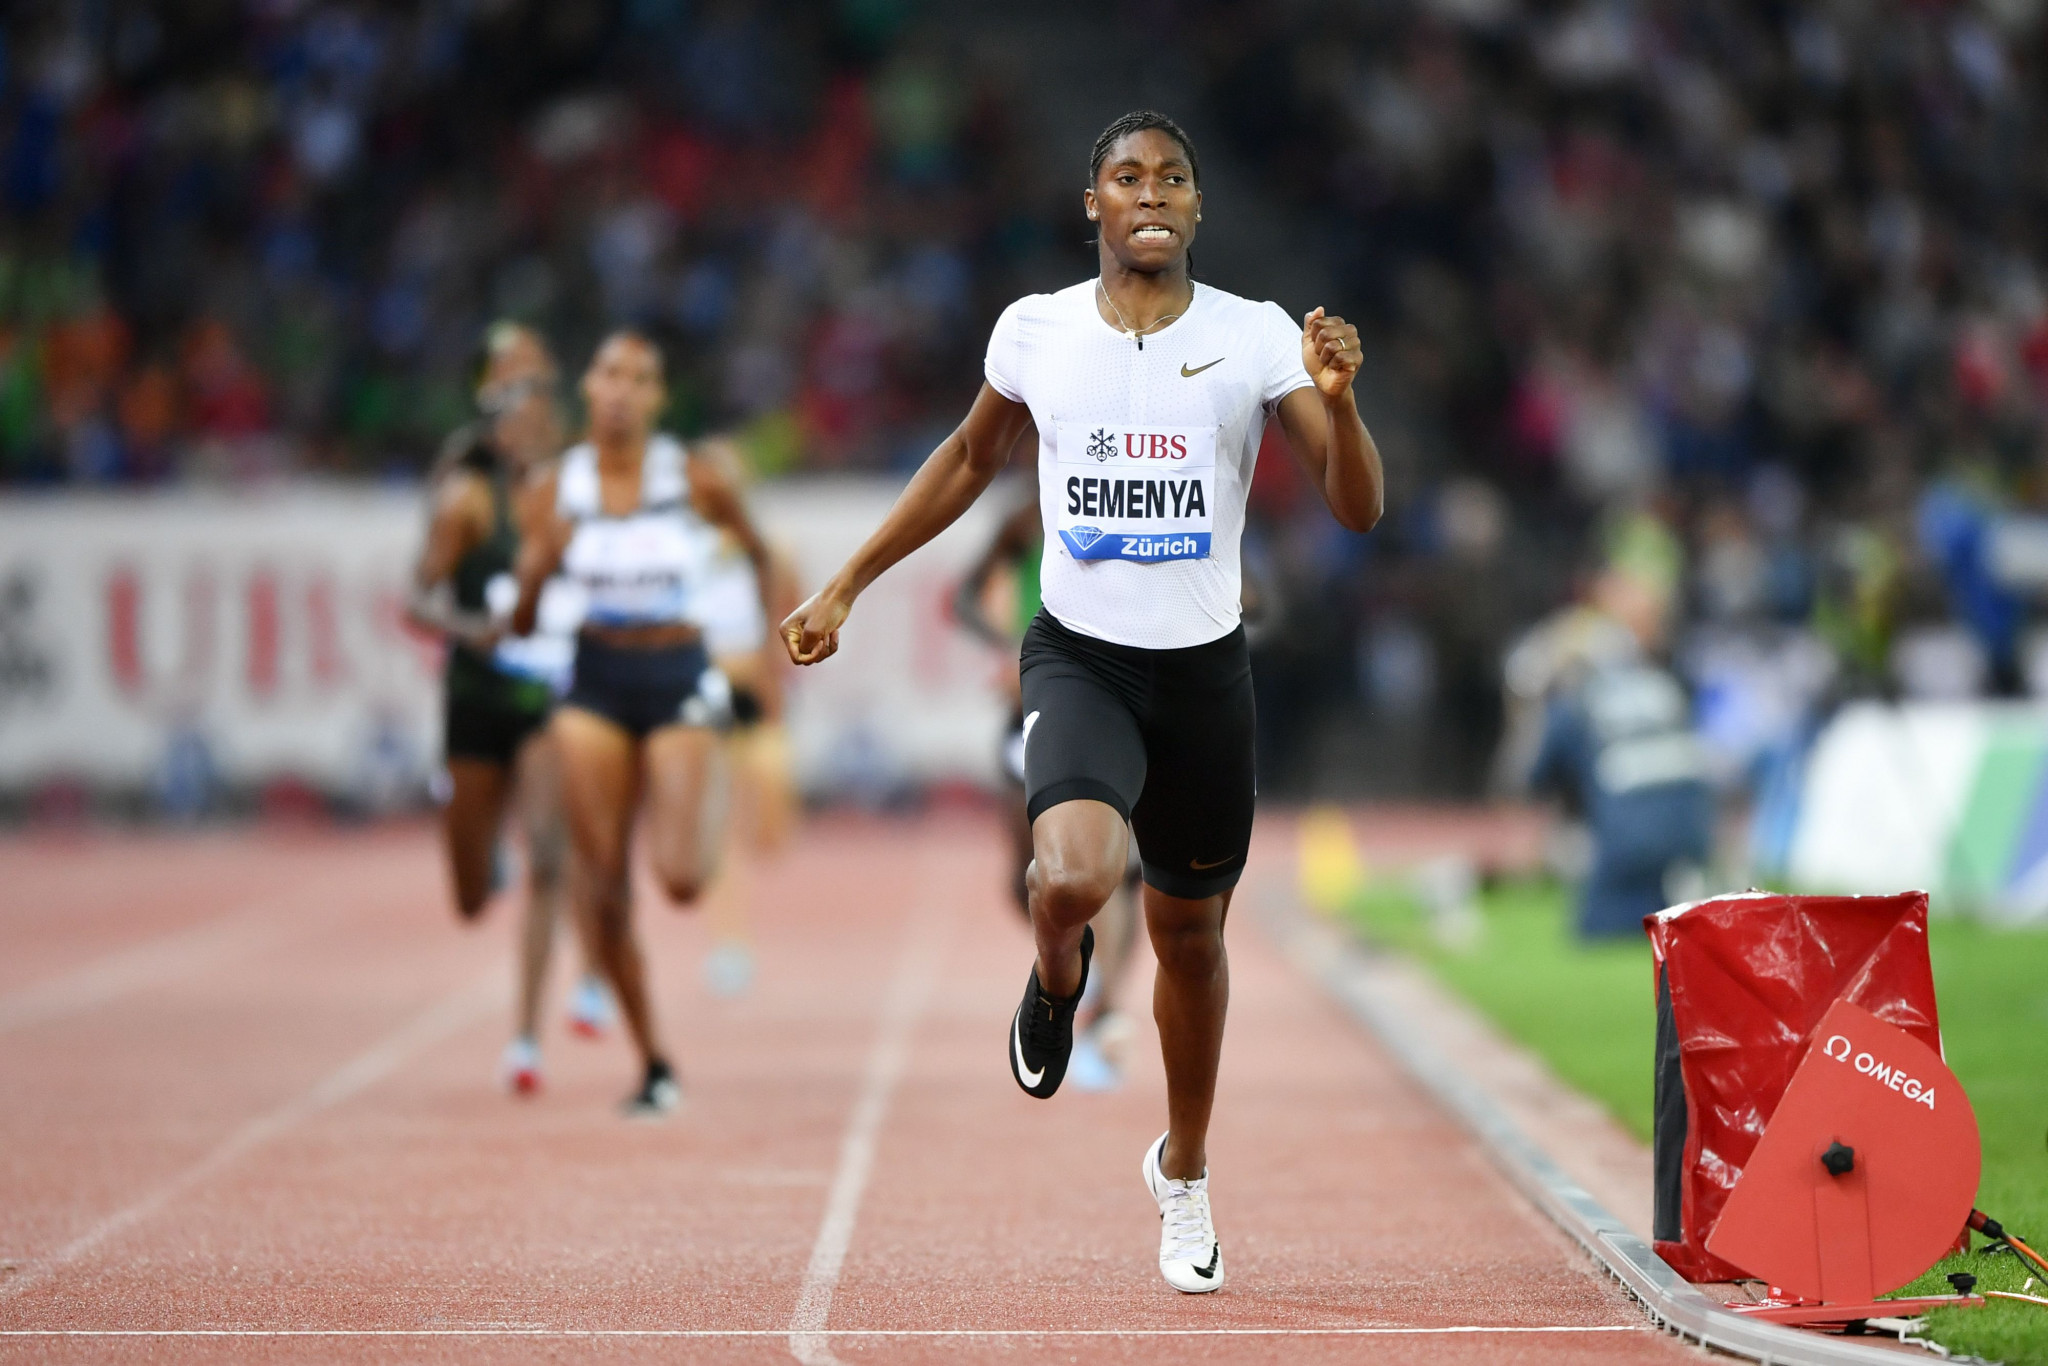 Nike's new advert "dream crazier" backs Caster Semenya in her case against the IAAF ©Getty Images